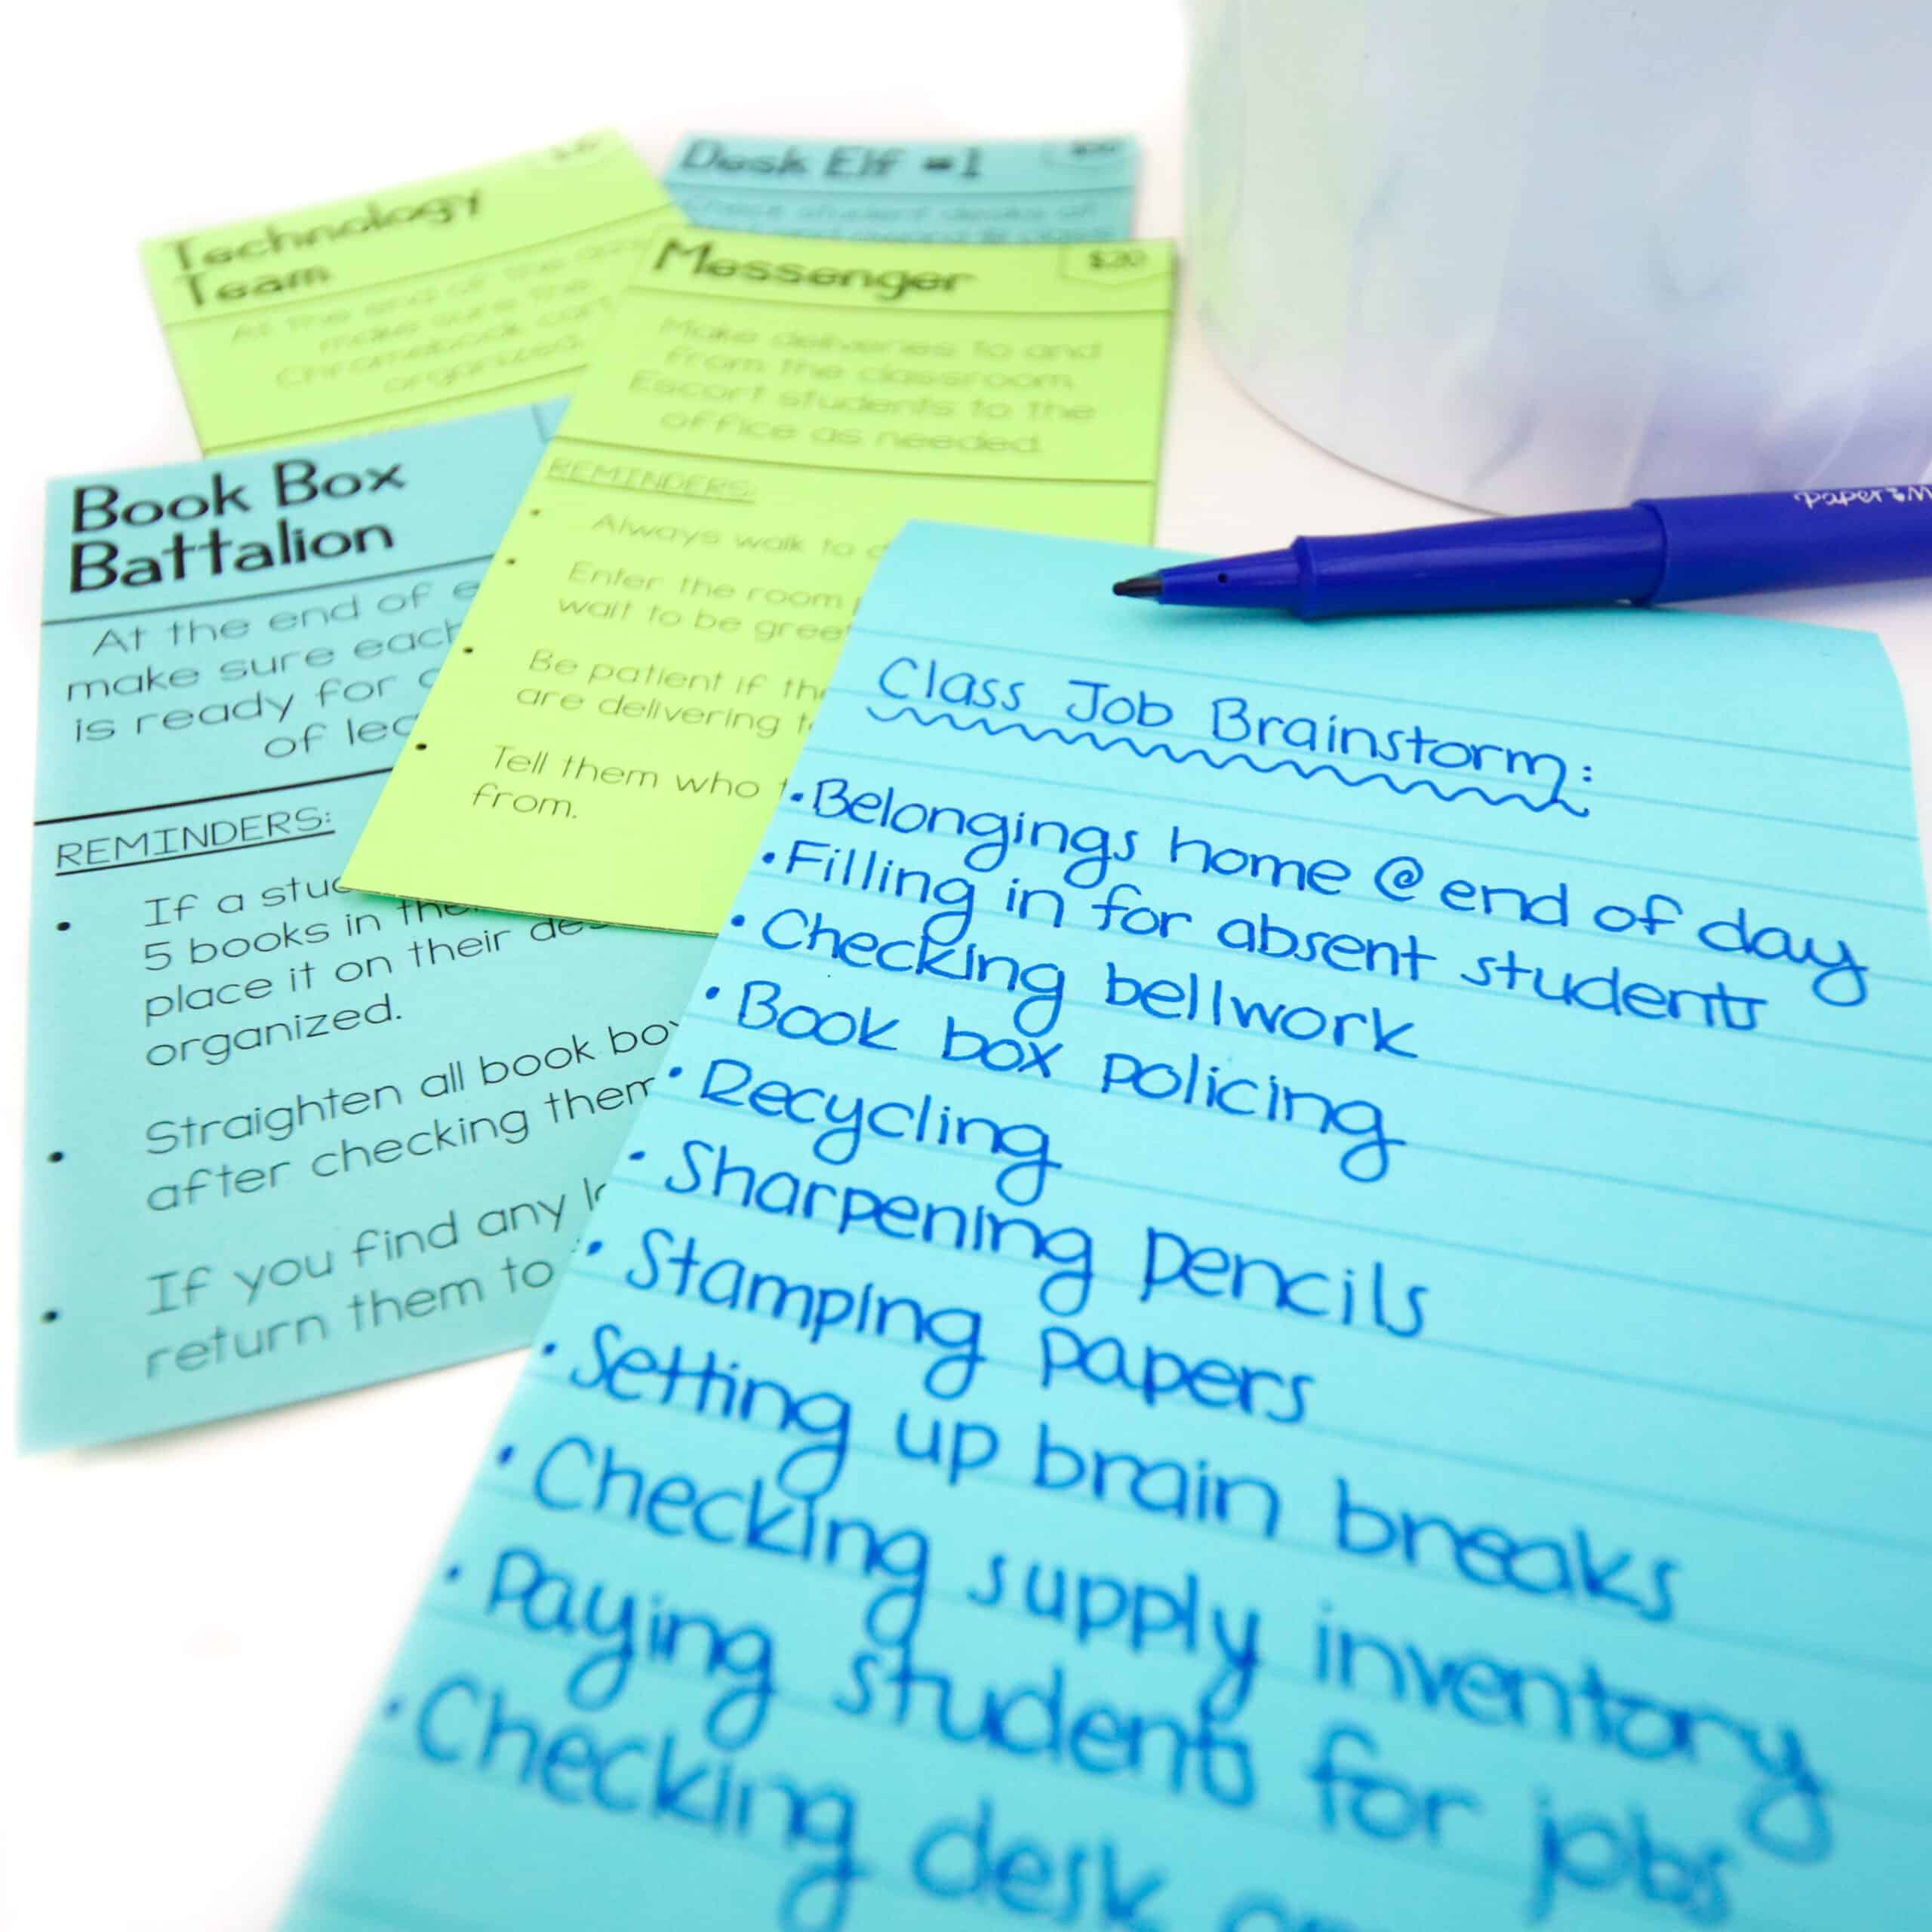 Core Inspiration's classroom job brainstorm back to school project with all classroom job ideas listed on a sticky note